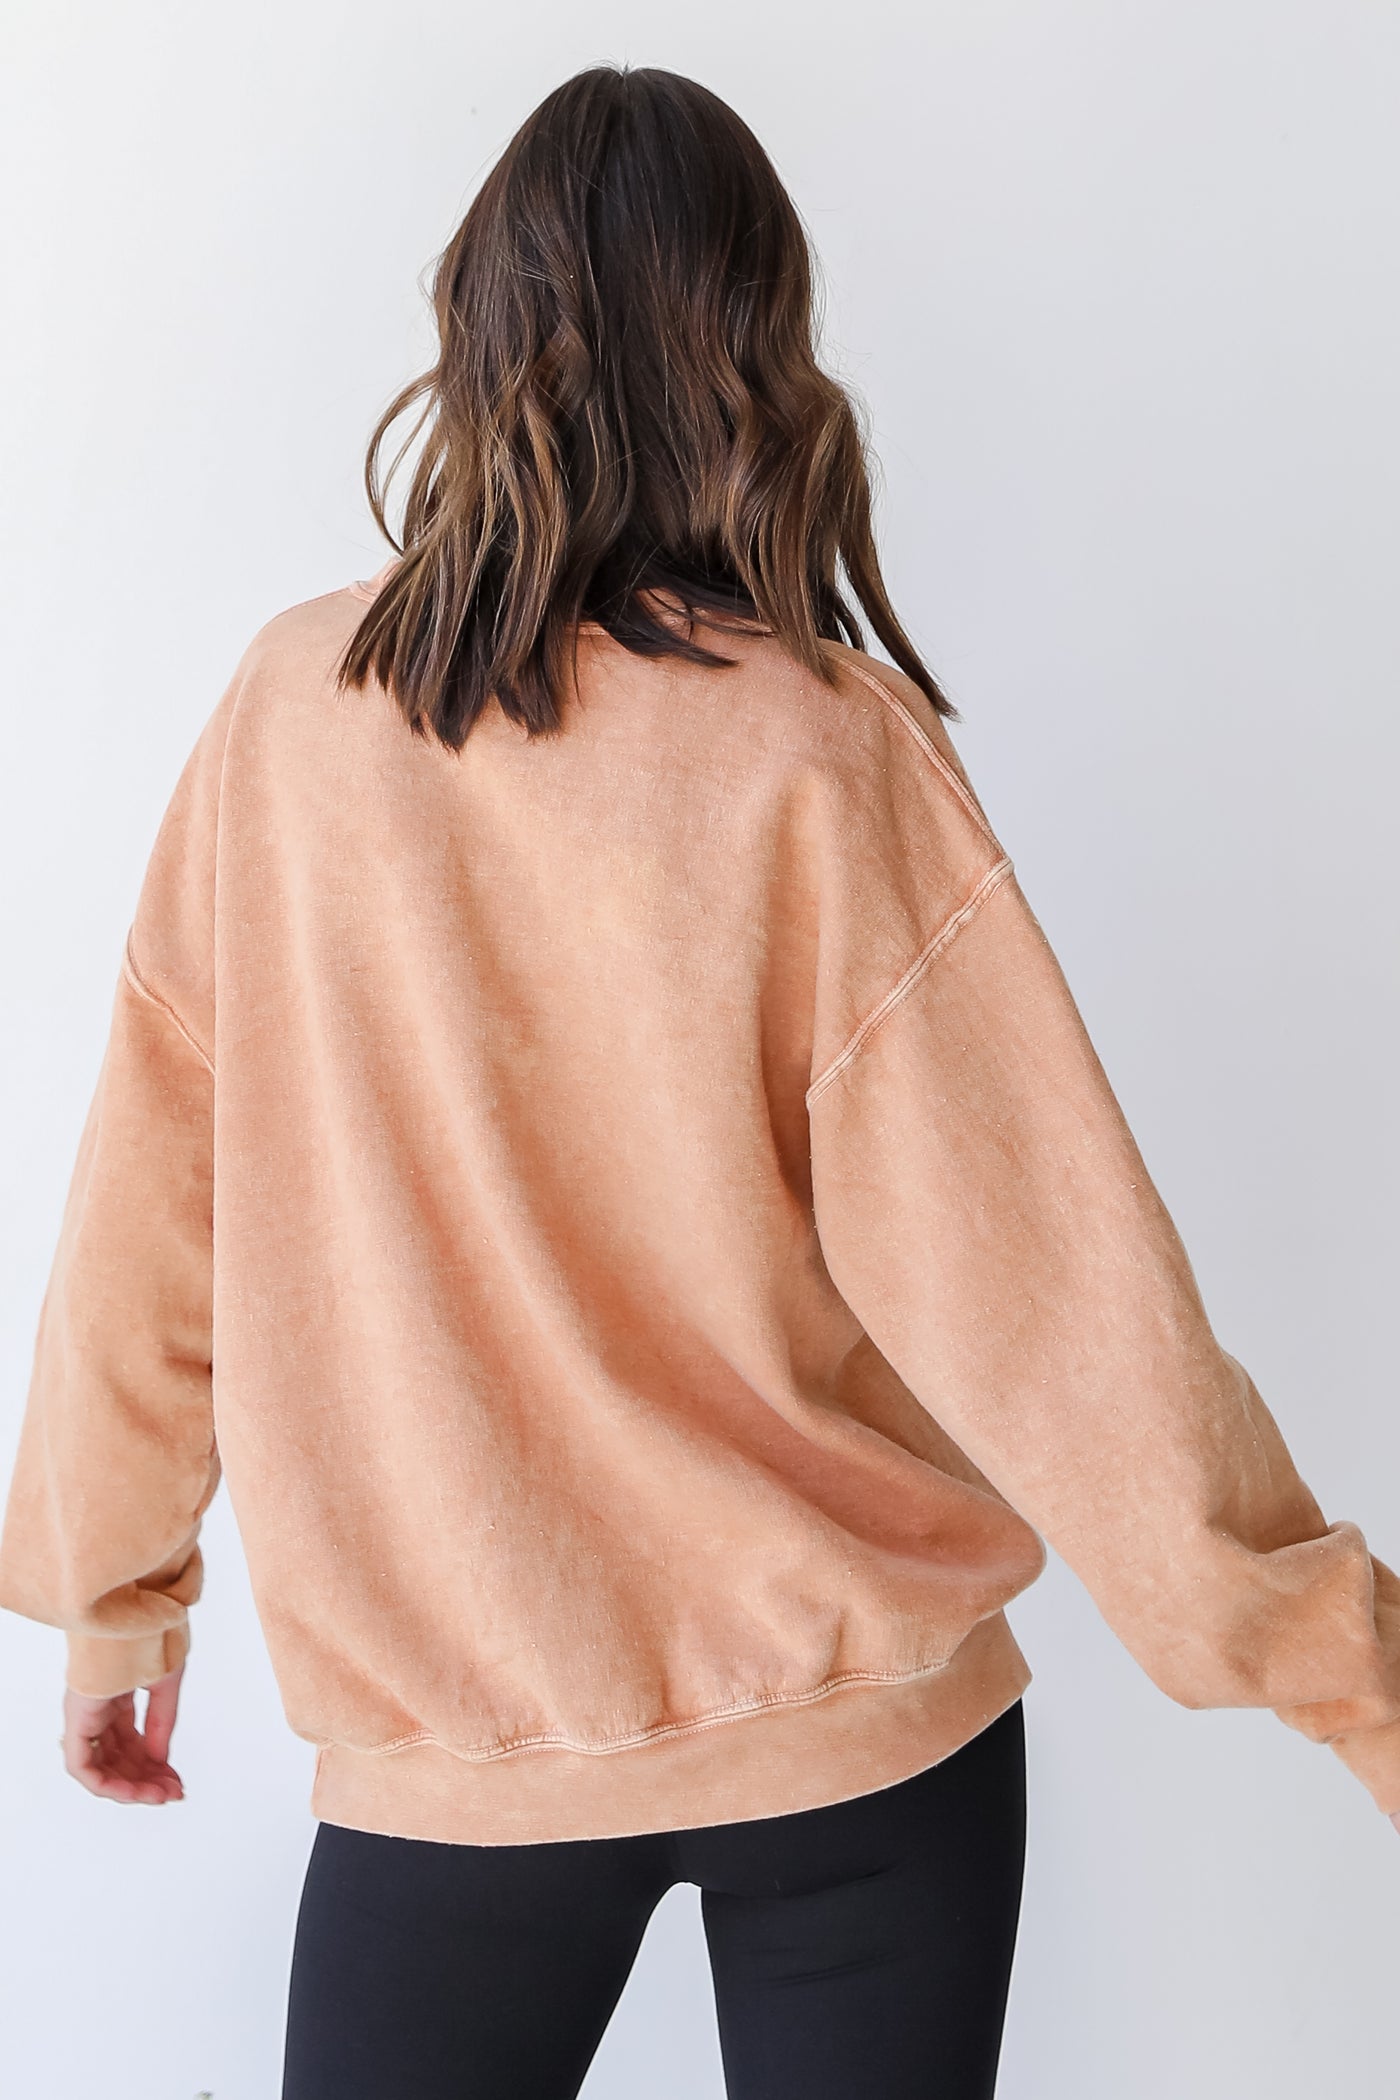 Free Spirit Pullover back view